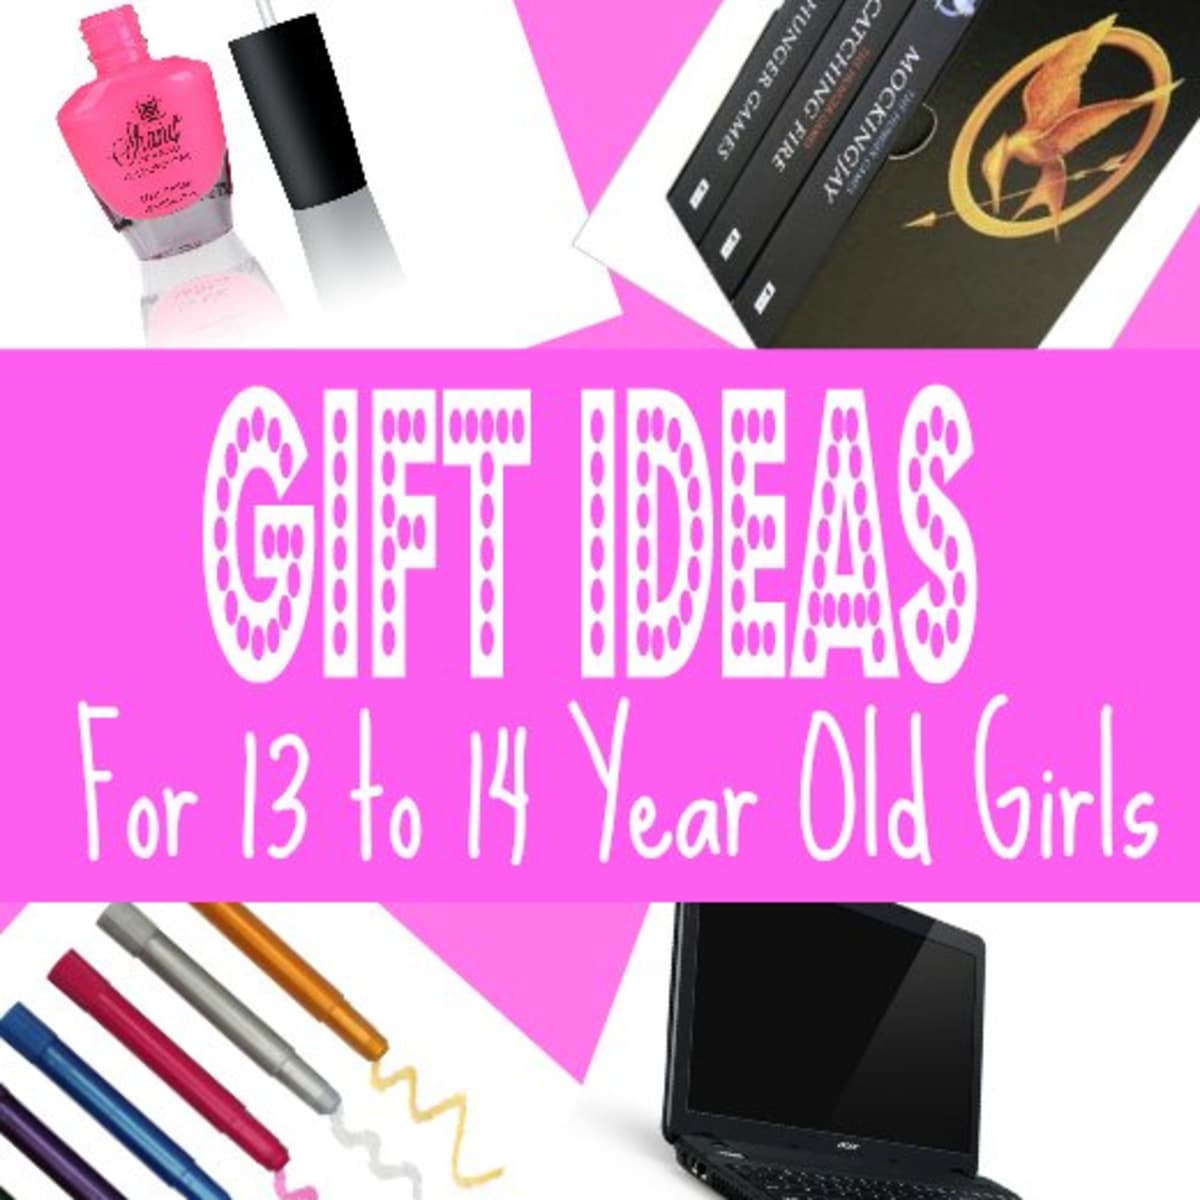 30 Best Gifts for 14 Year Old Boys